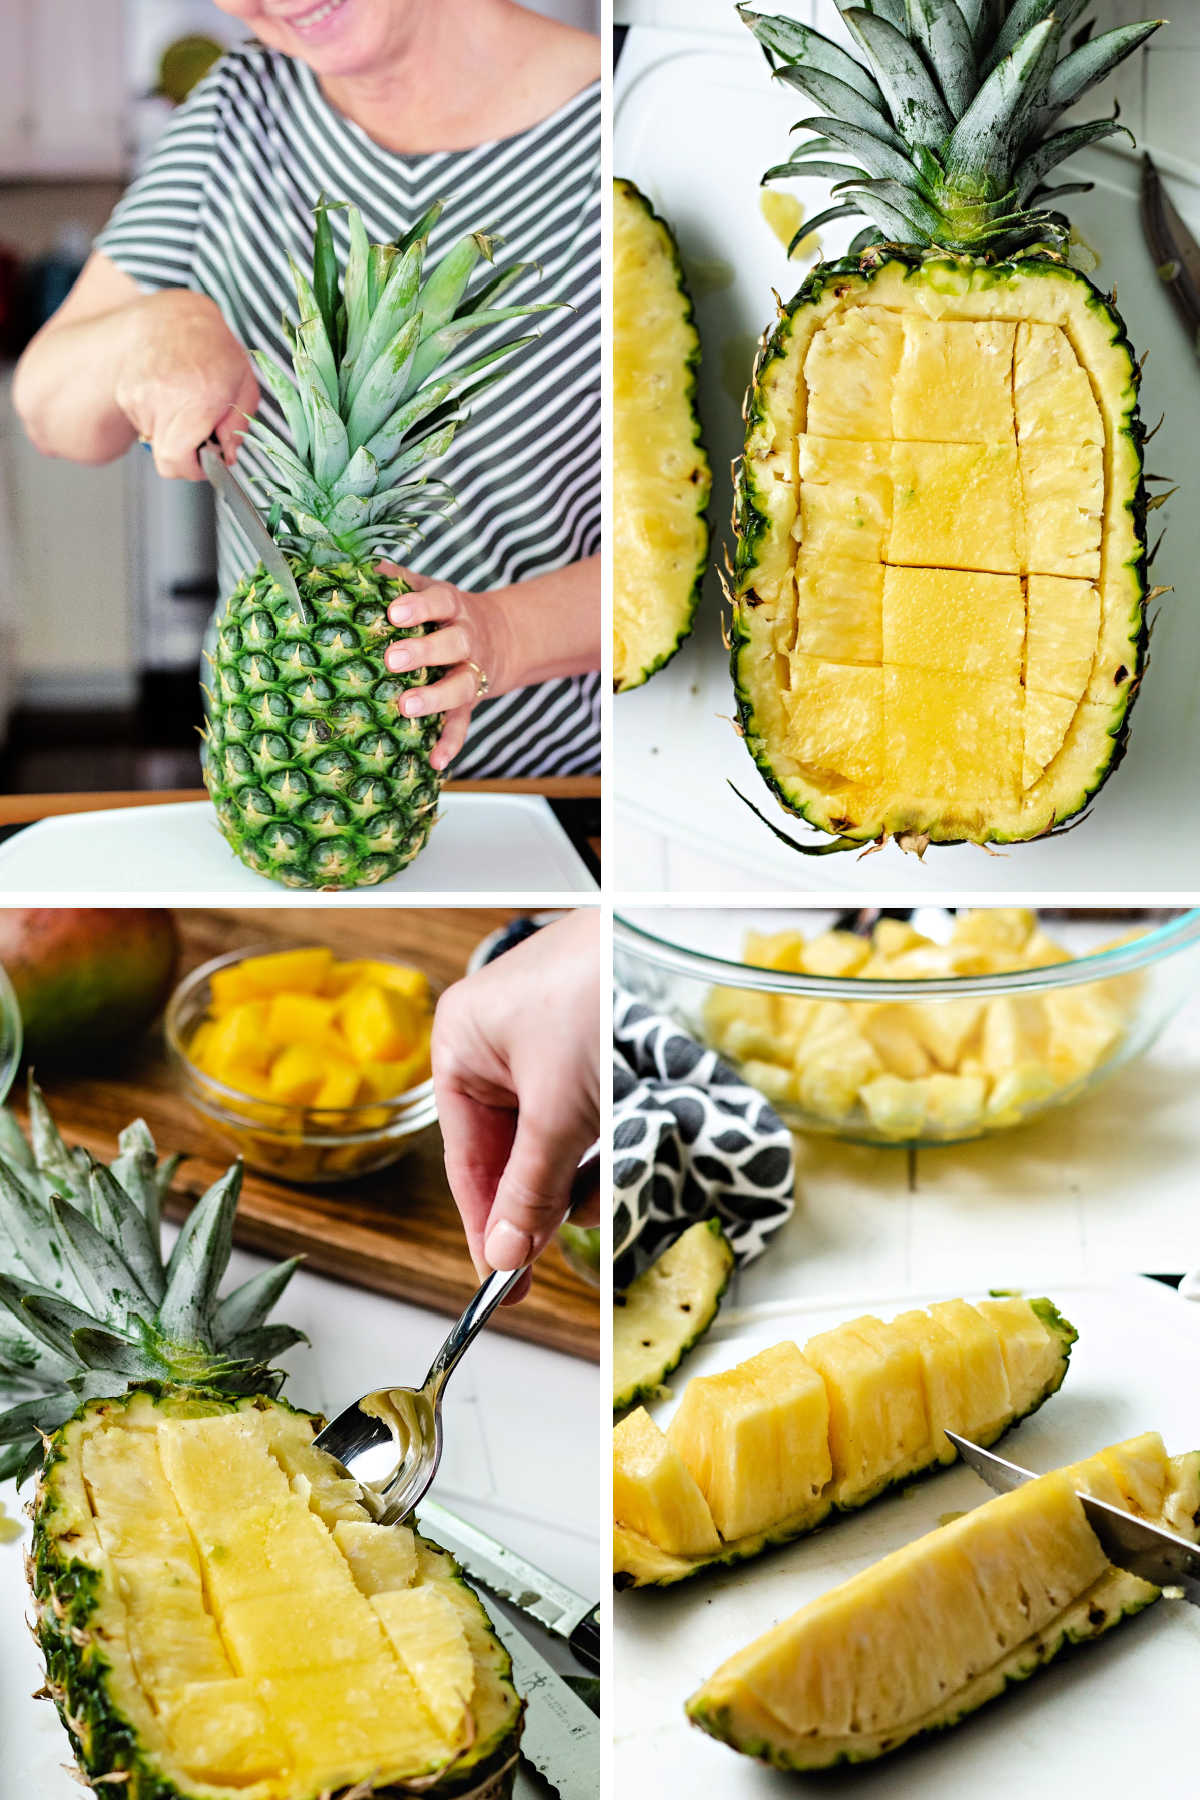 process steps for making a pineapple bowl: slice off 1/3 of pineapple, score with a knife, remove sections.